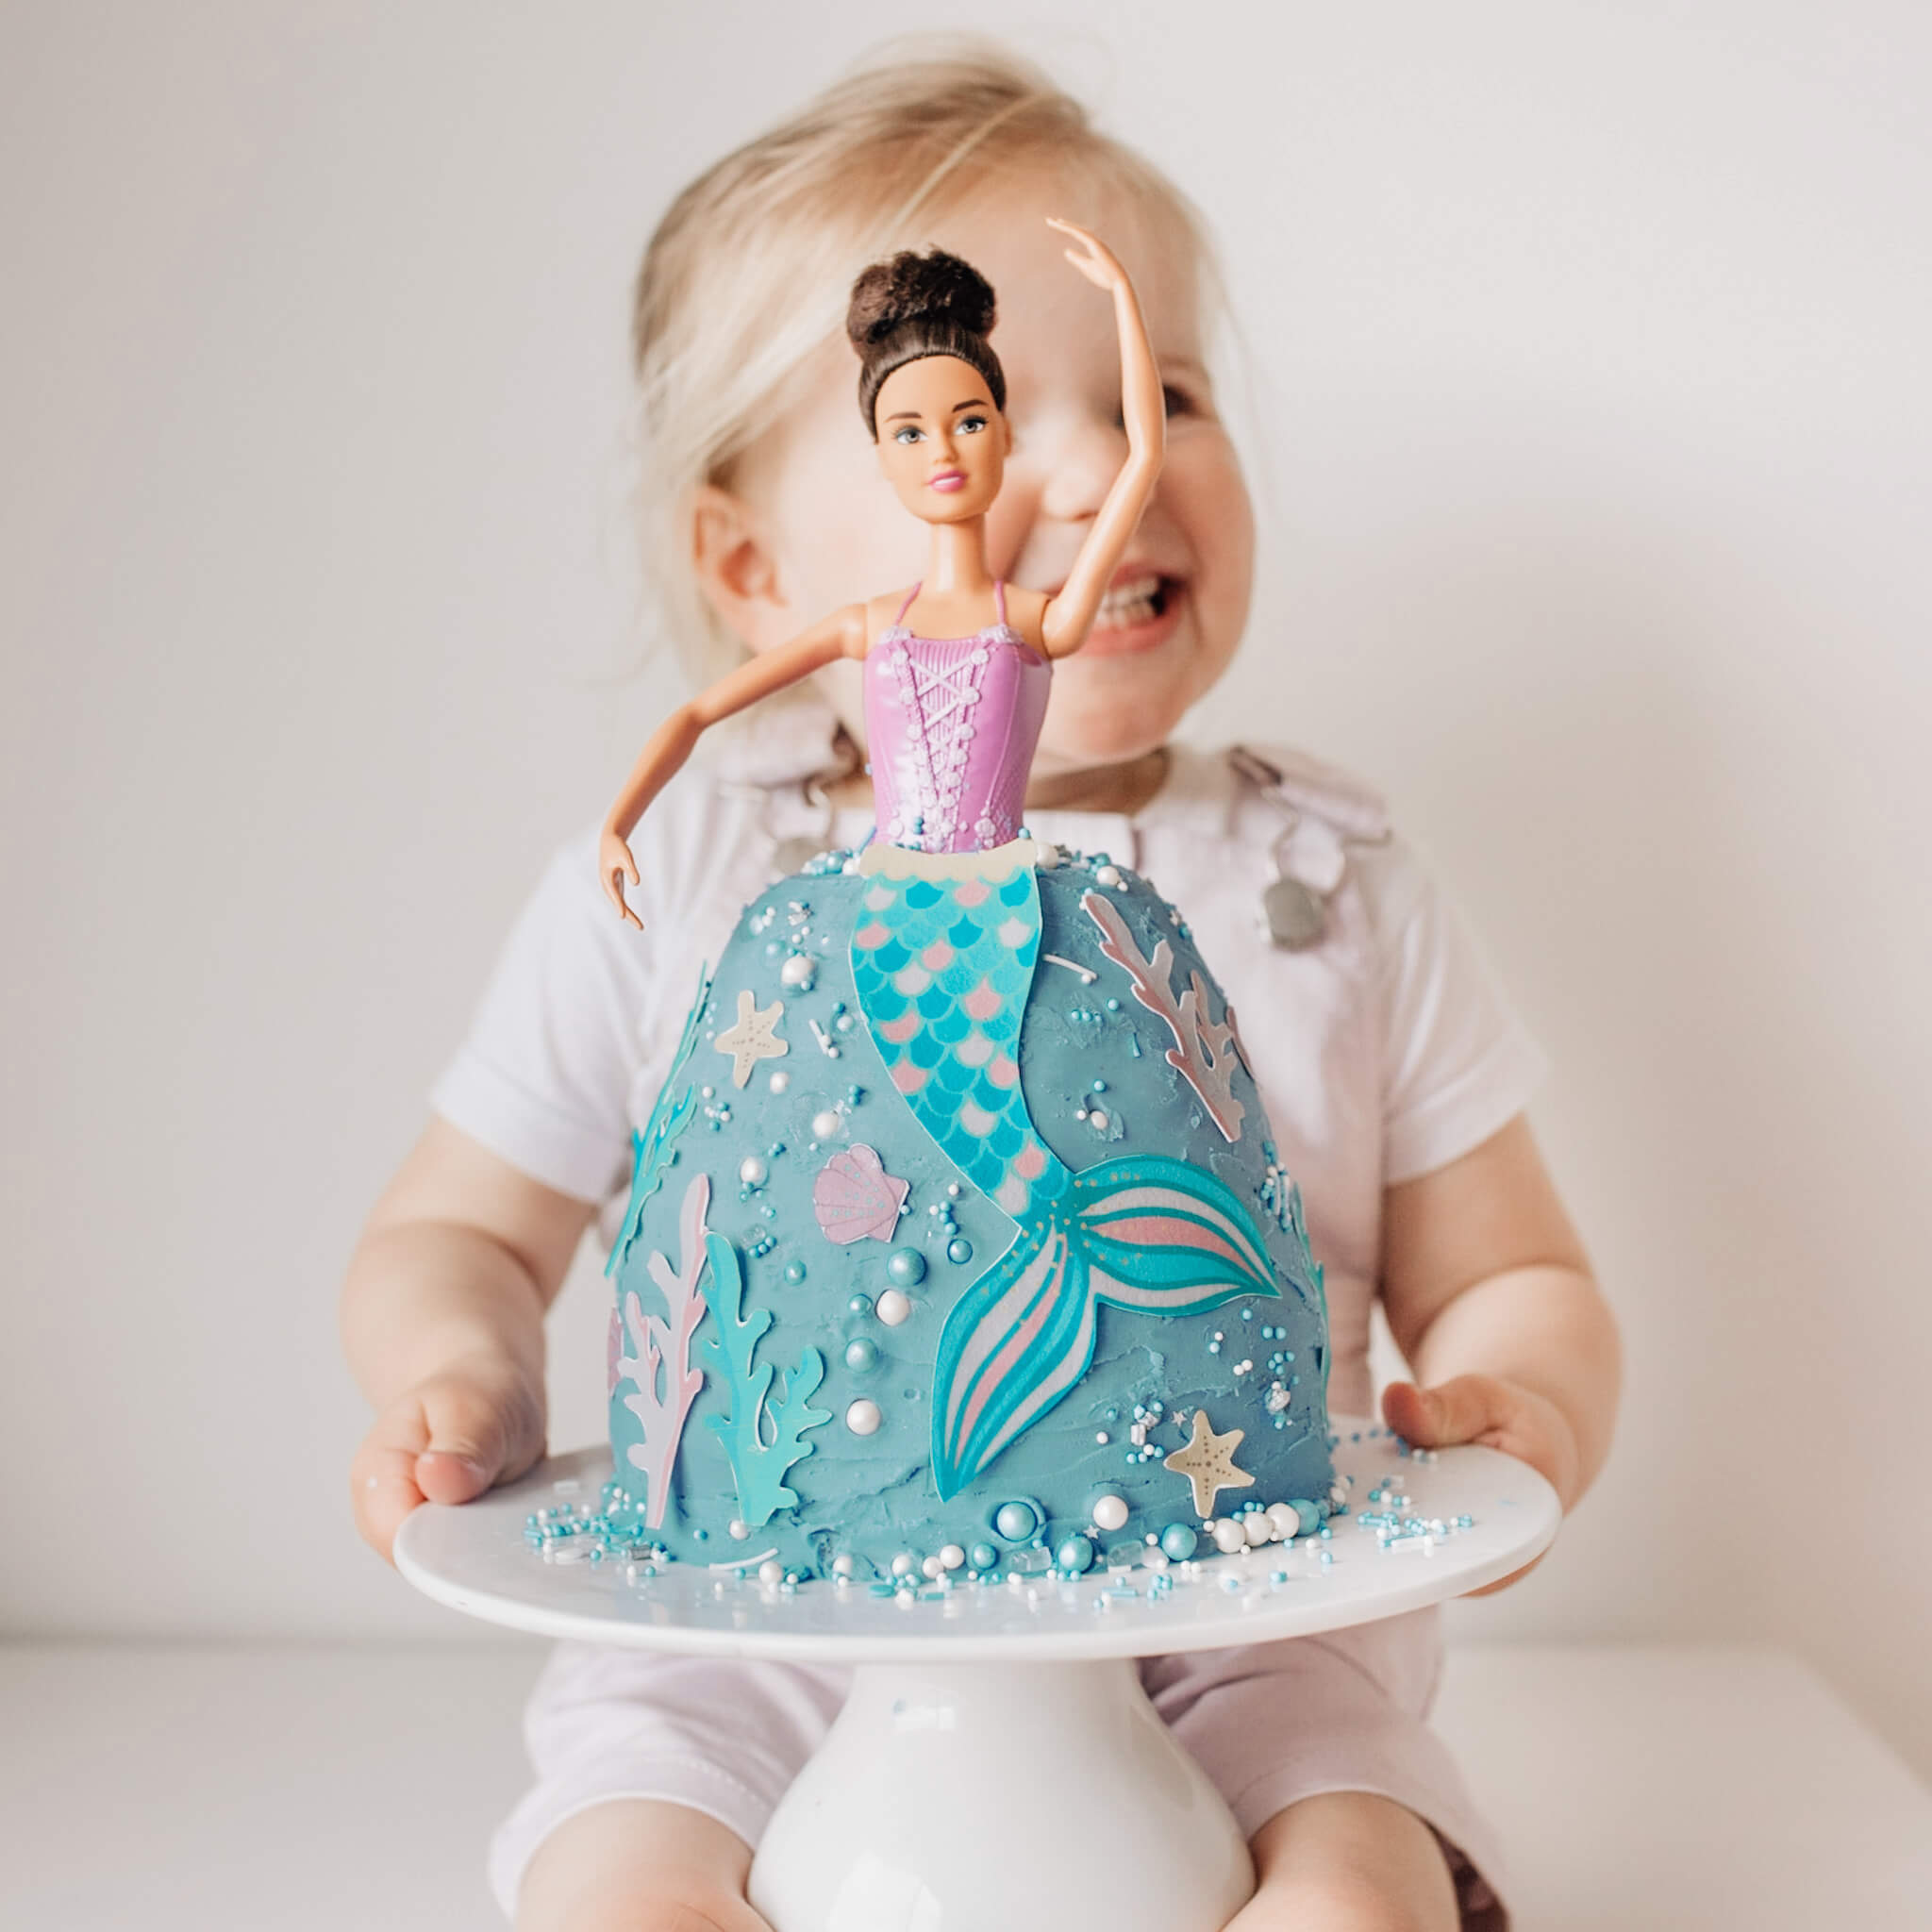 Stylish Girl Cake - How to Make the Easiest Doll Cake - Roxy's Kitchen